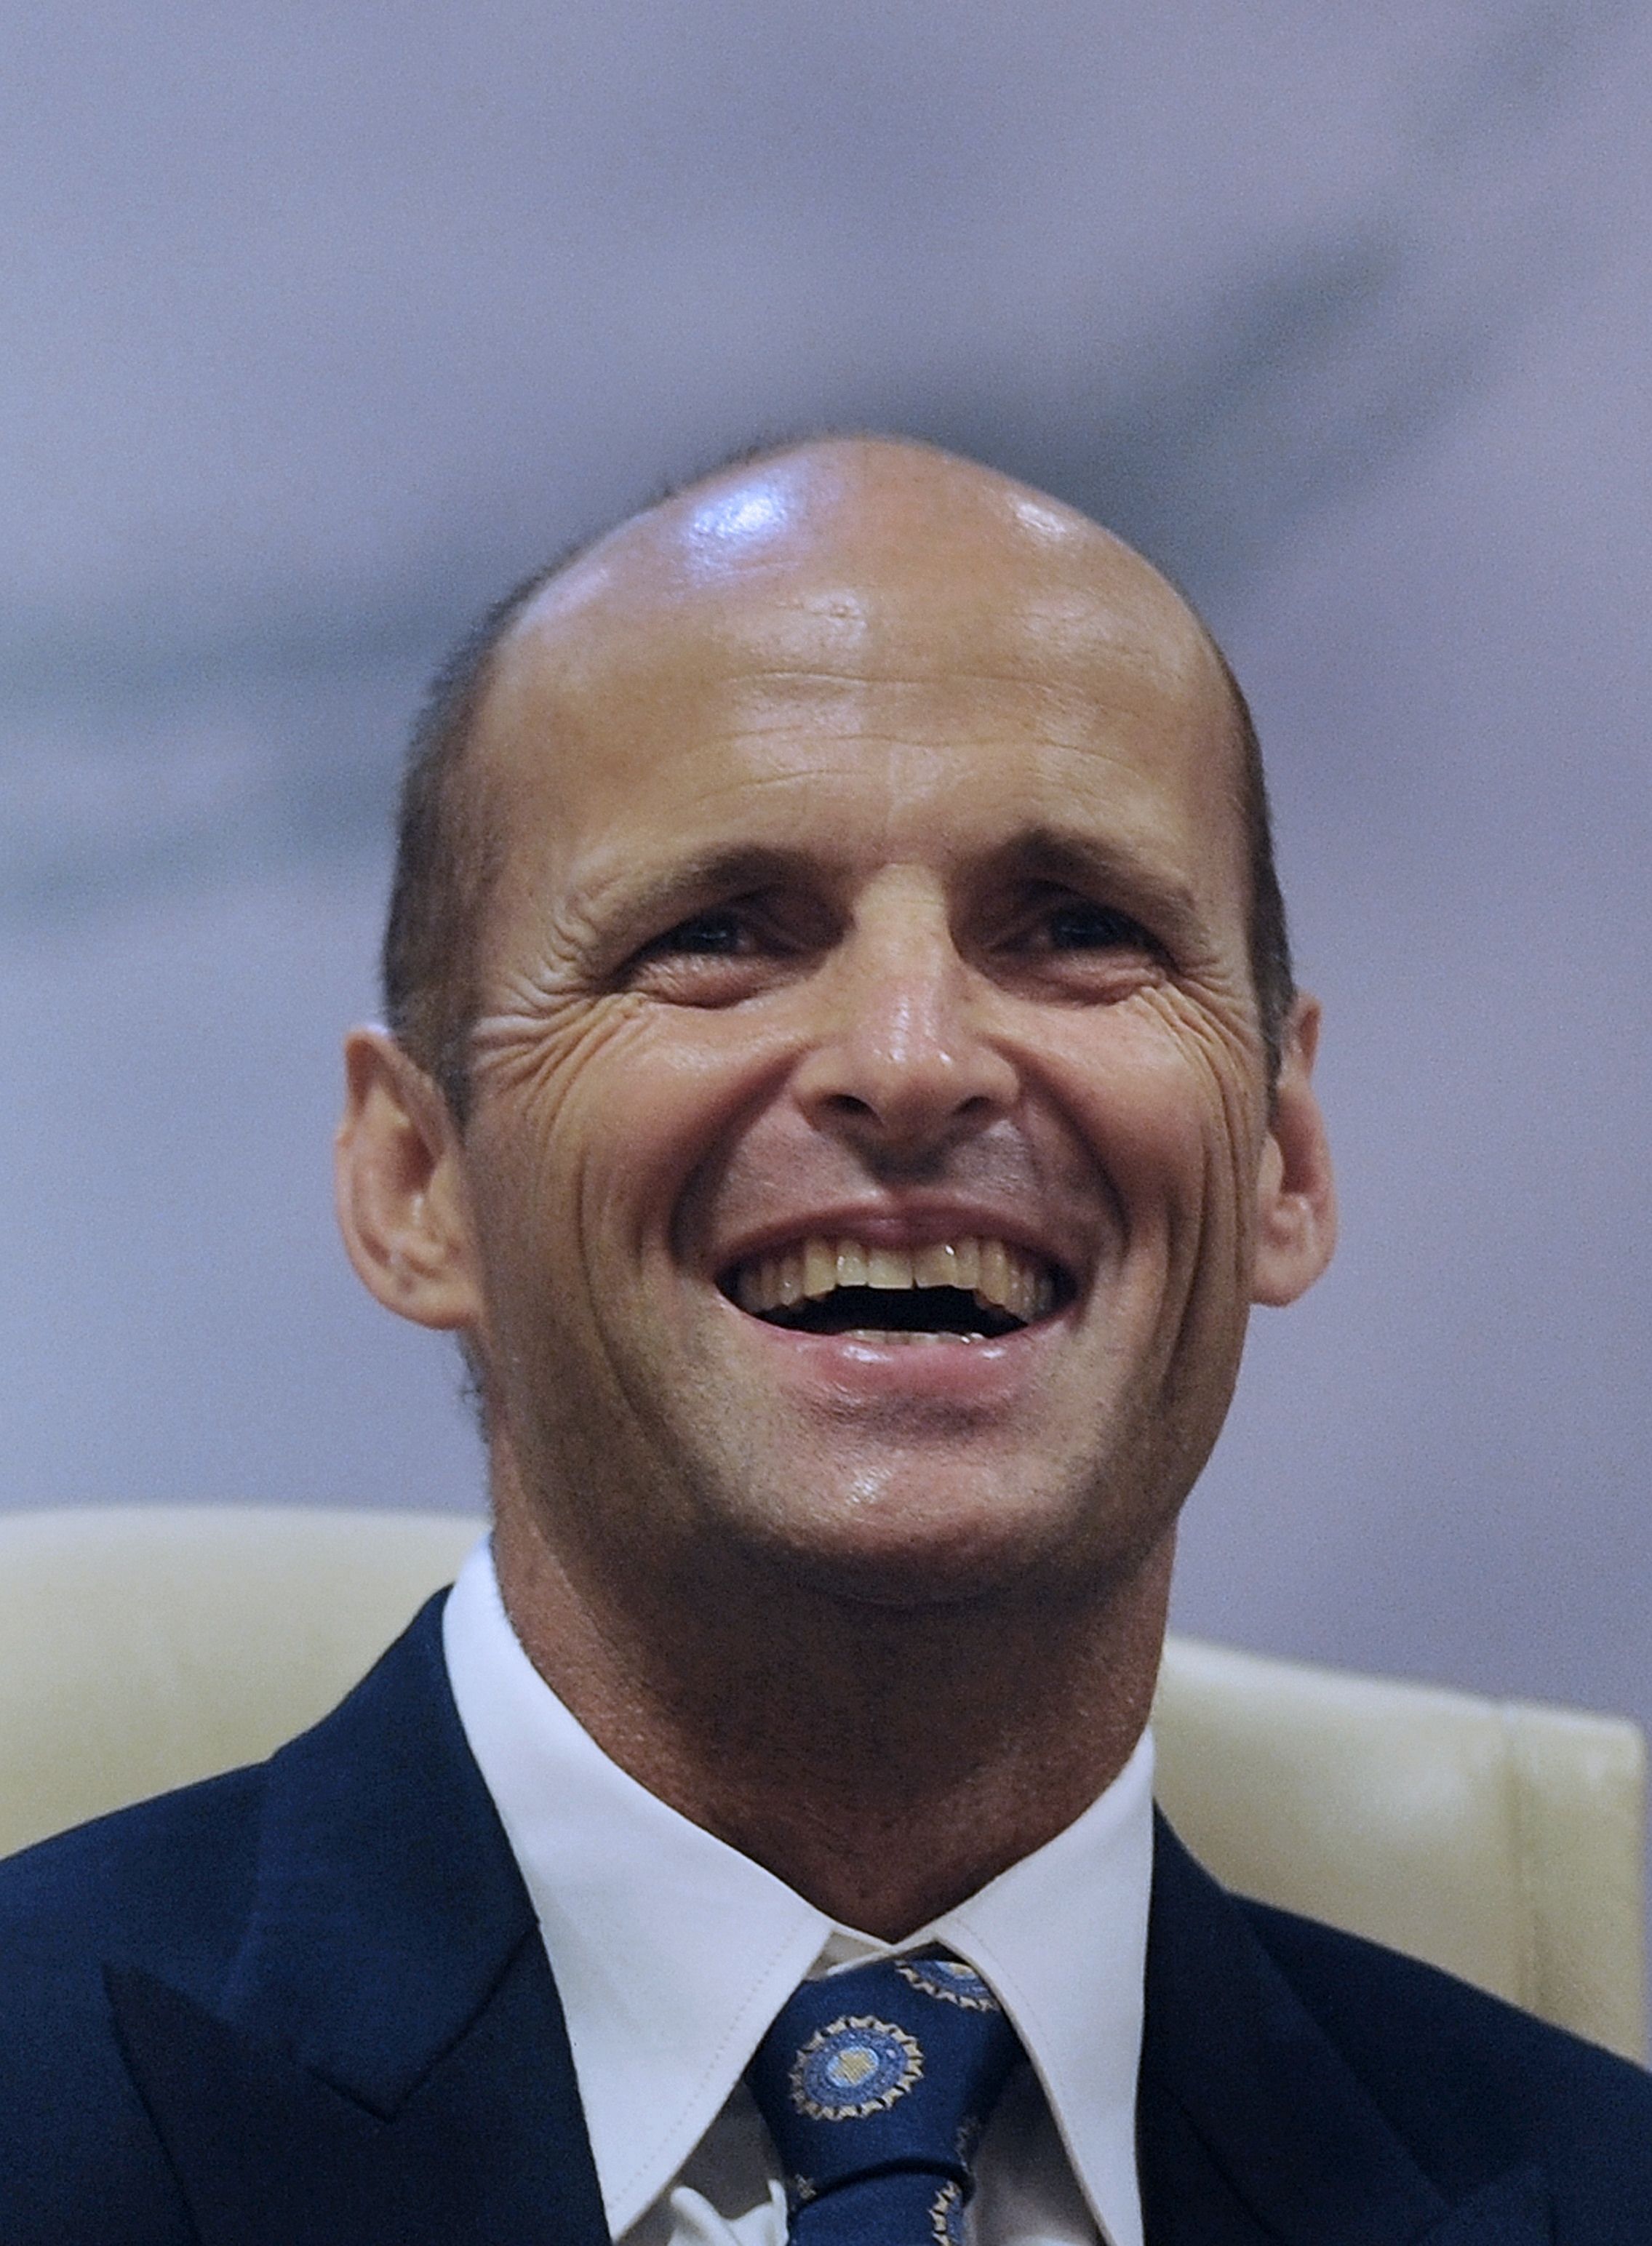 India's outgoing cricket coach Gary Kirsten smiles as he addresses a news conference at the head office of the Board of Control for Cricket in India (BCCI) in Mumbai on April 5, 2011. Credit: AFP Photo